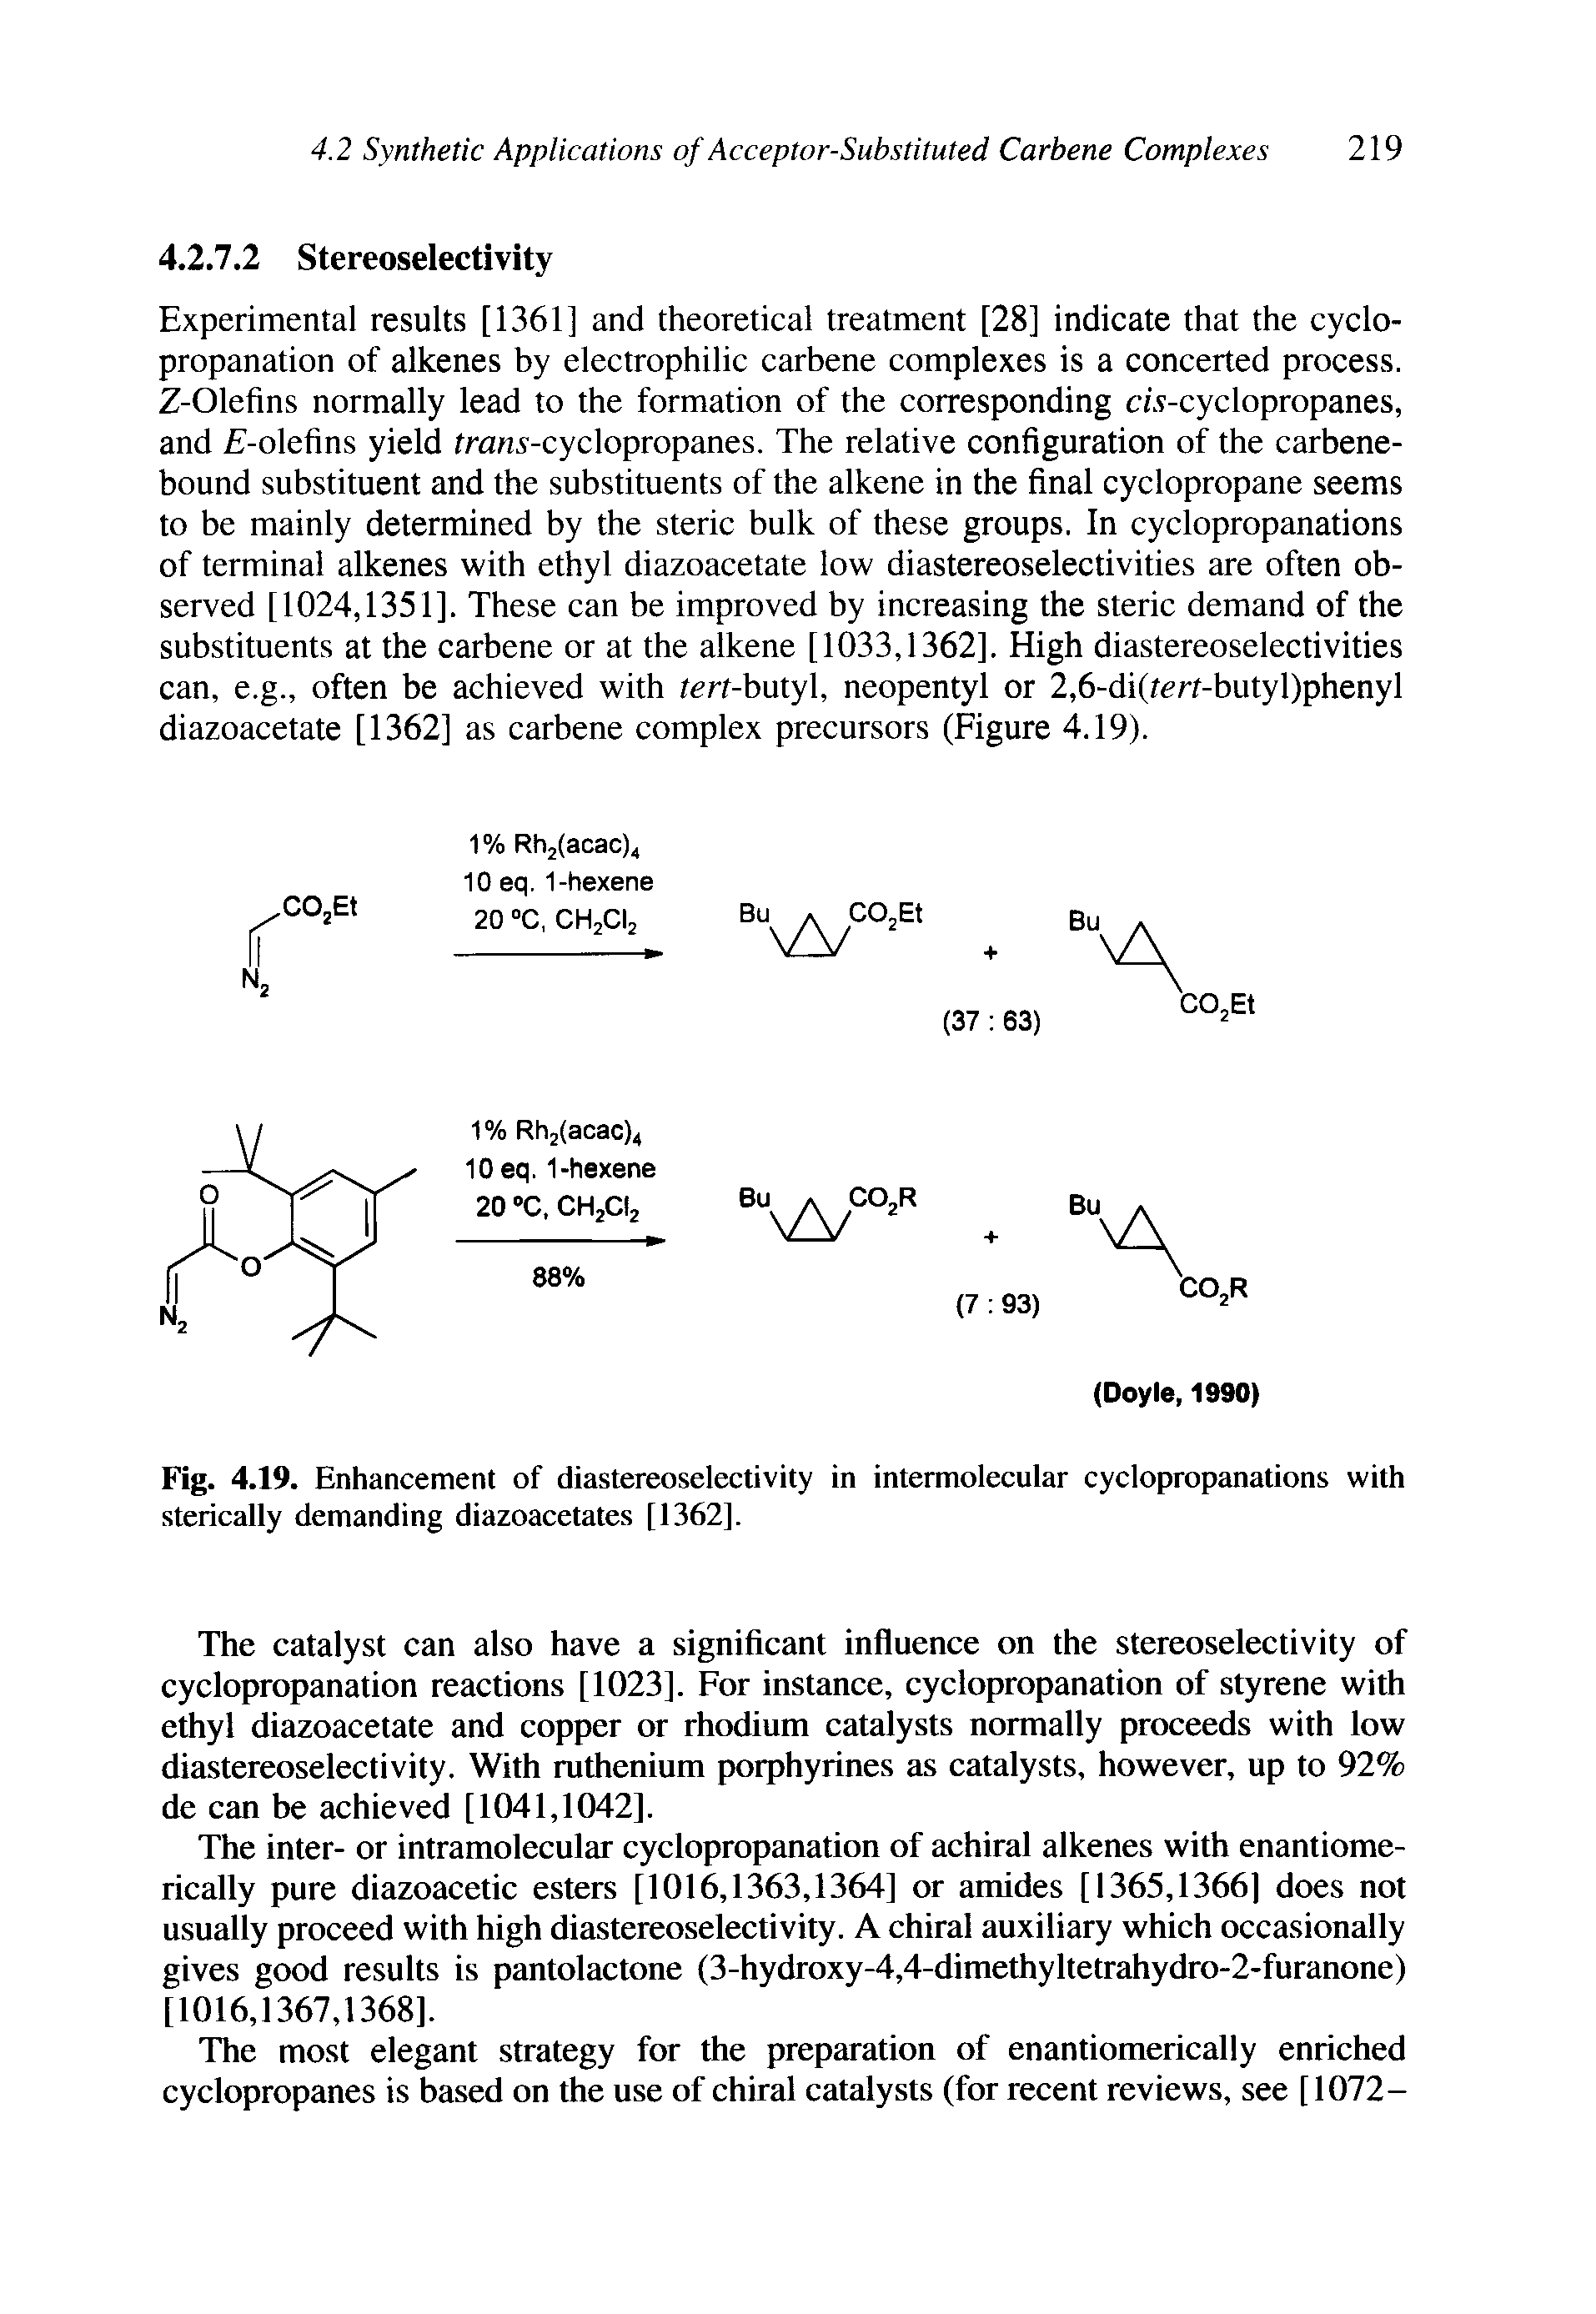 Fig. 4.19. Enhancement of diastereoselectivity in intermolecular cyclopropanations with sterically demanding diazoacetates [1362].